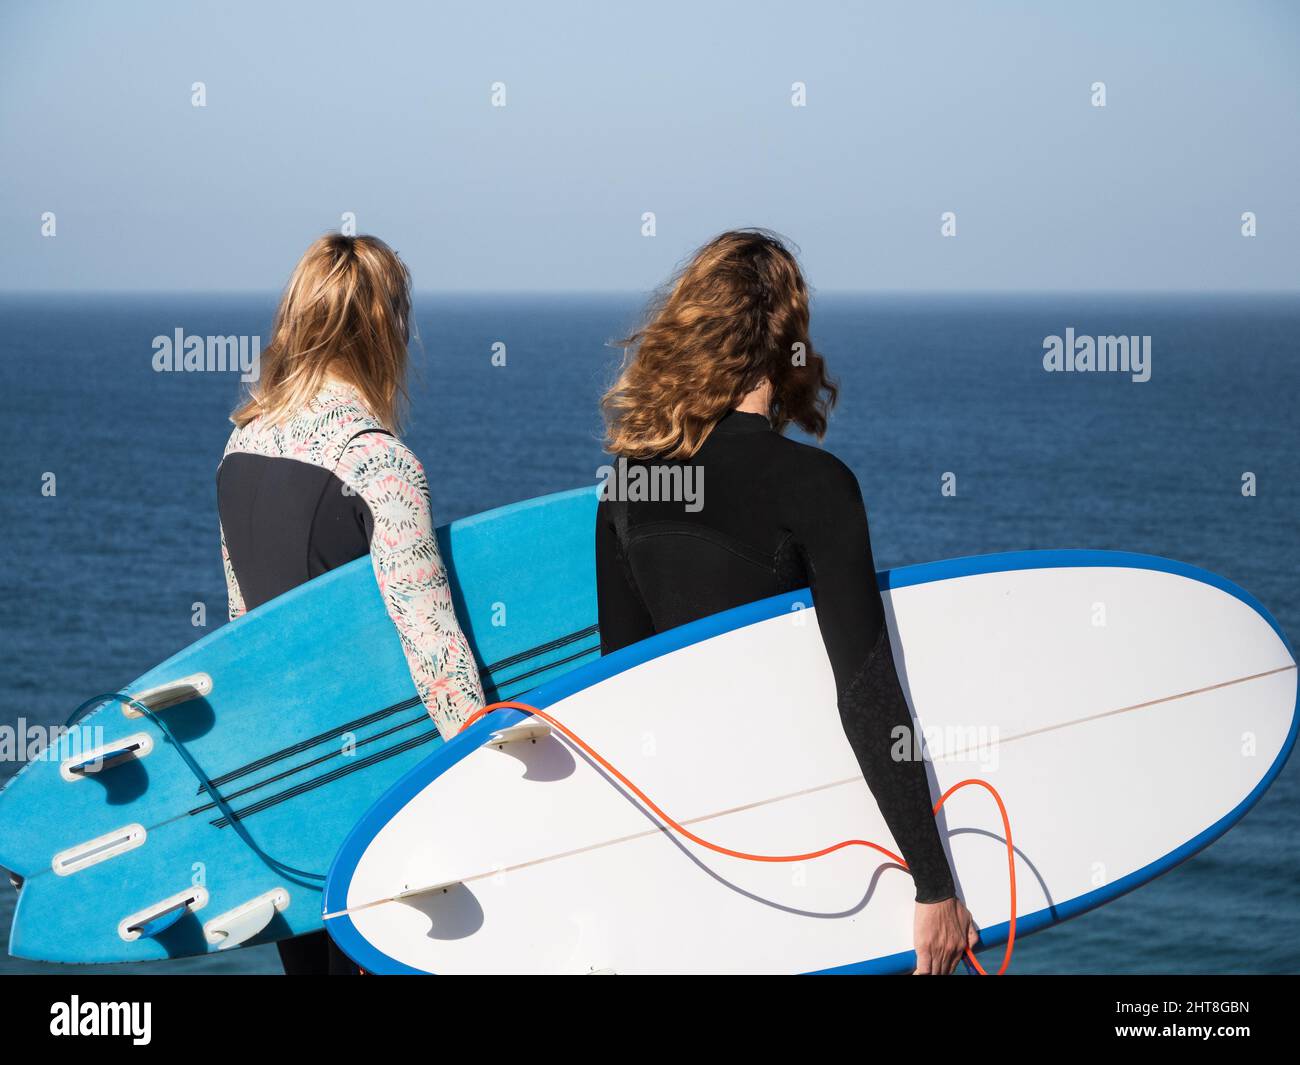 Unrecognizable surfer women watching the ocean holding surfboards Stock Photo